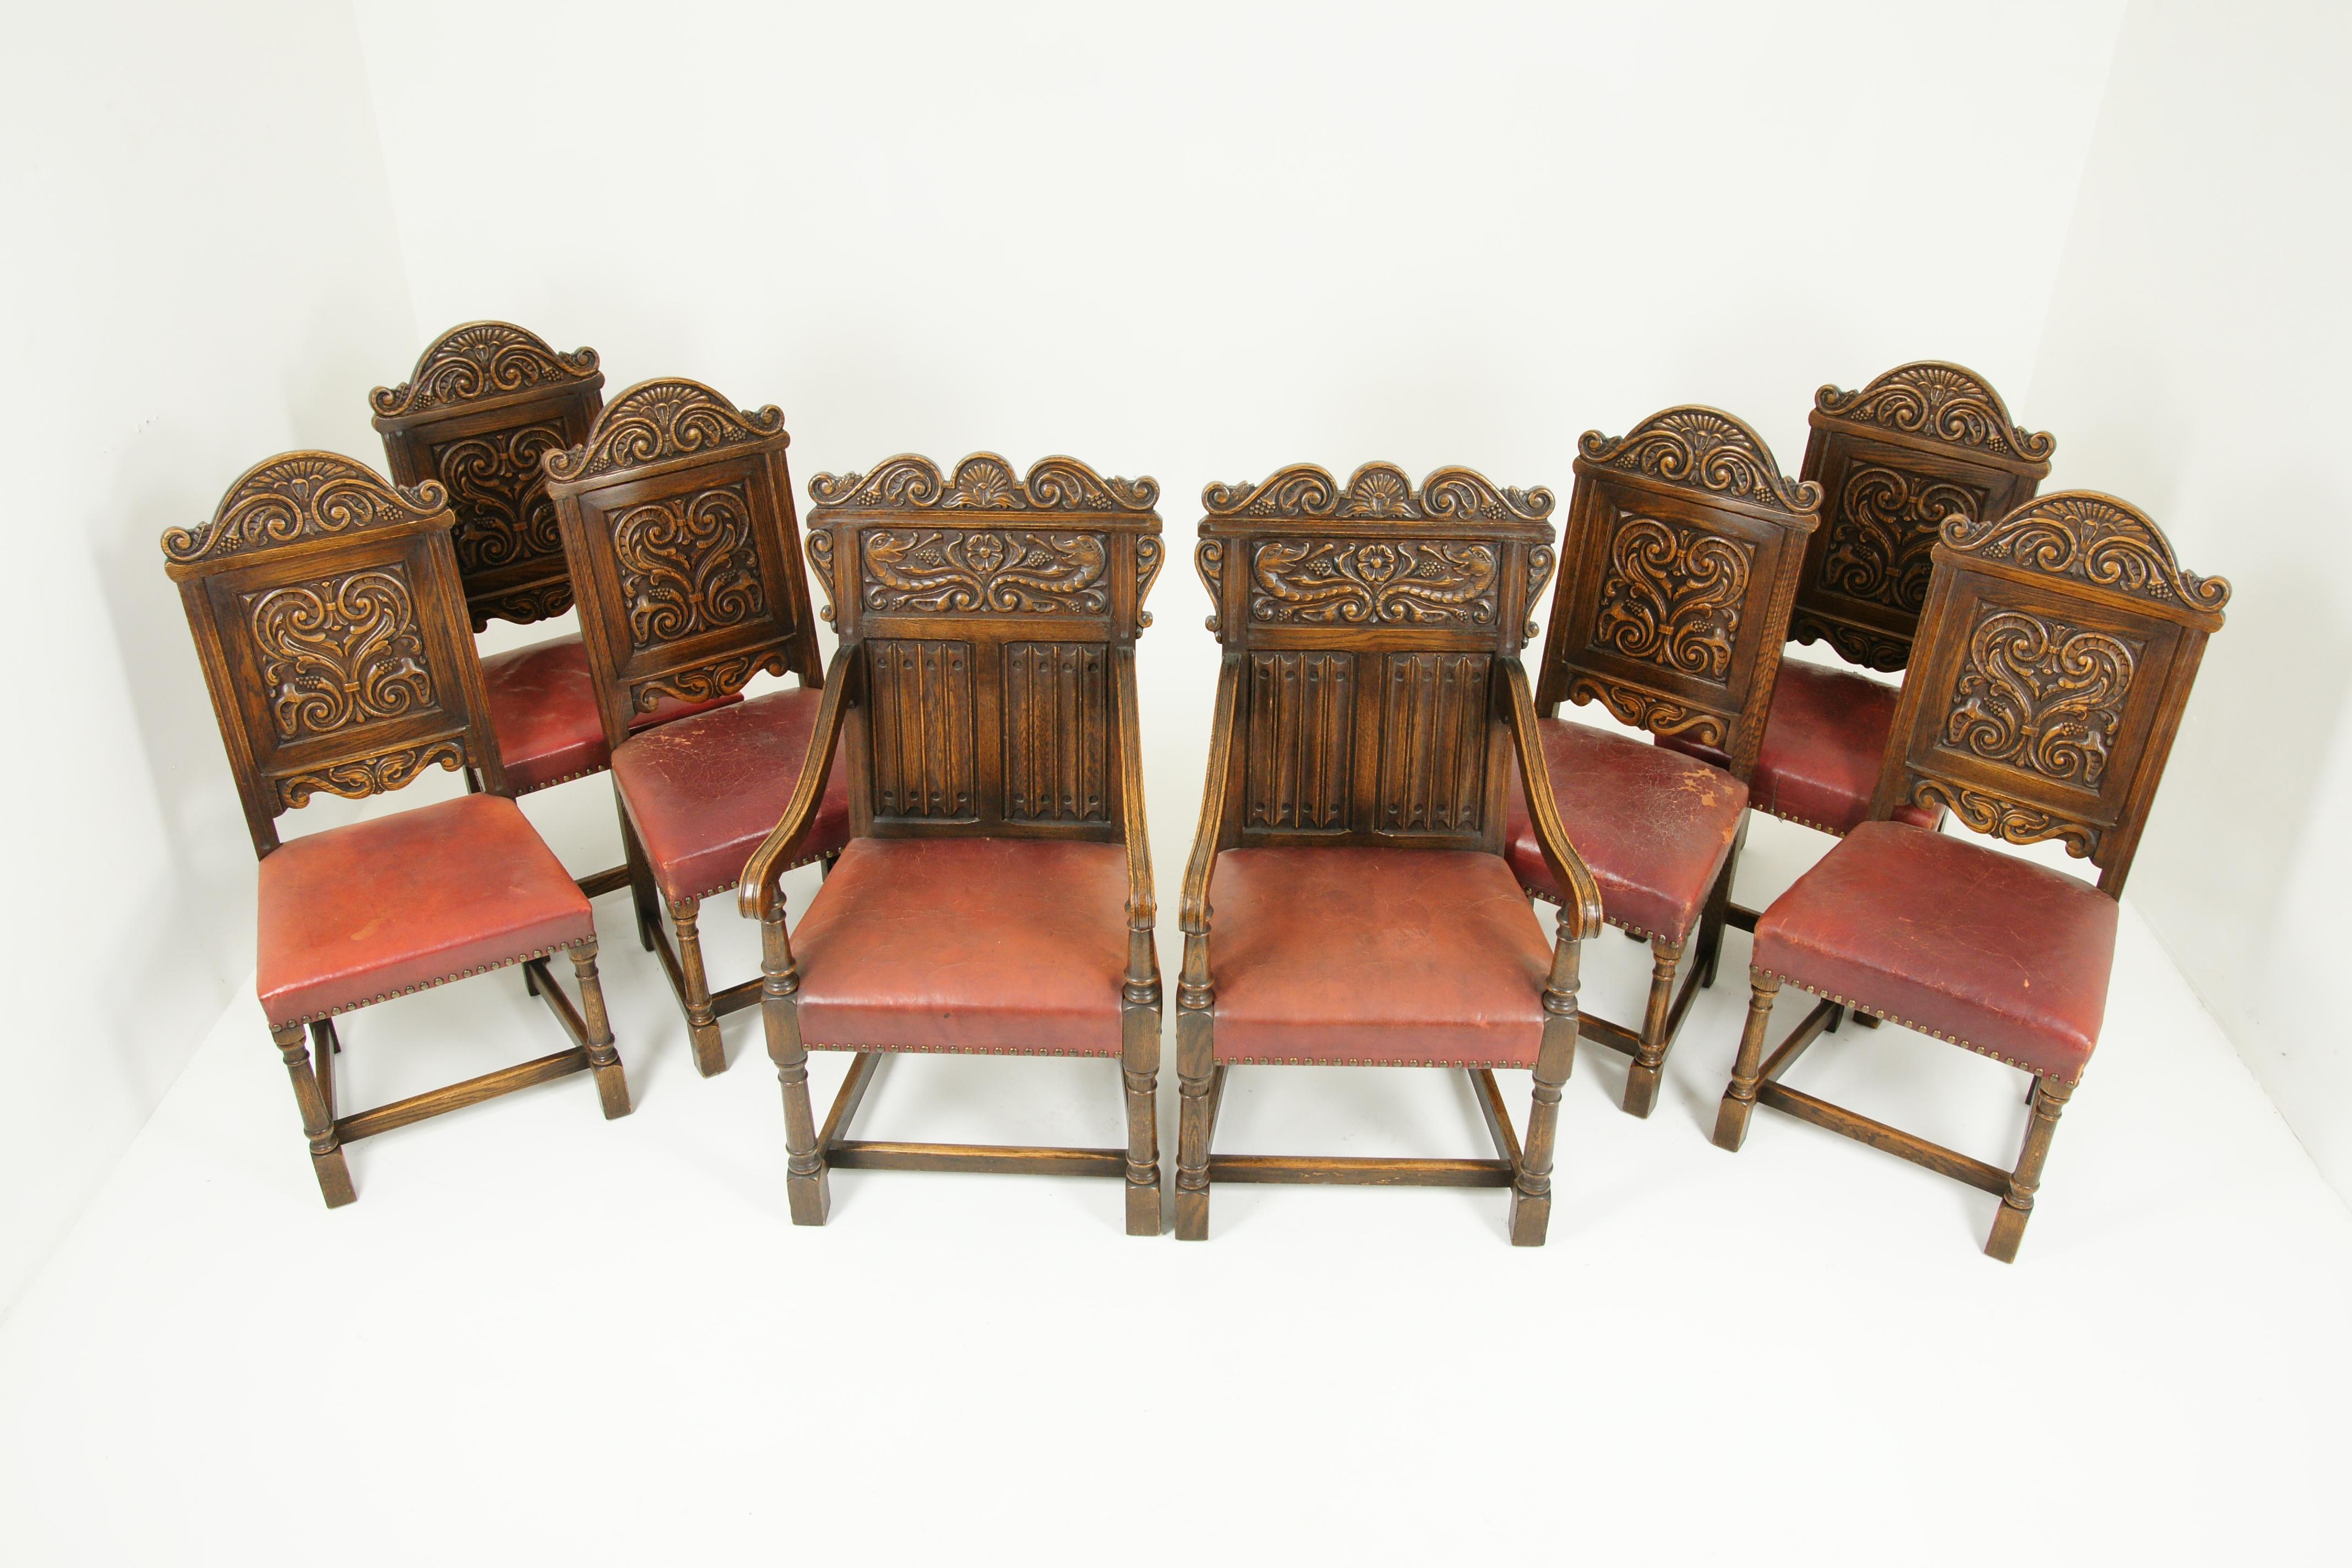 Antique dining chairs, Renaissance Revival chairs, oak, Krug of Kitchener, Canada 1930, Antique Furniture, B1523

Canada, 1930s
Solid oak construction
Original finish
Carved upper back with carved panel below
Original leather upholstered seat